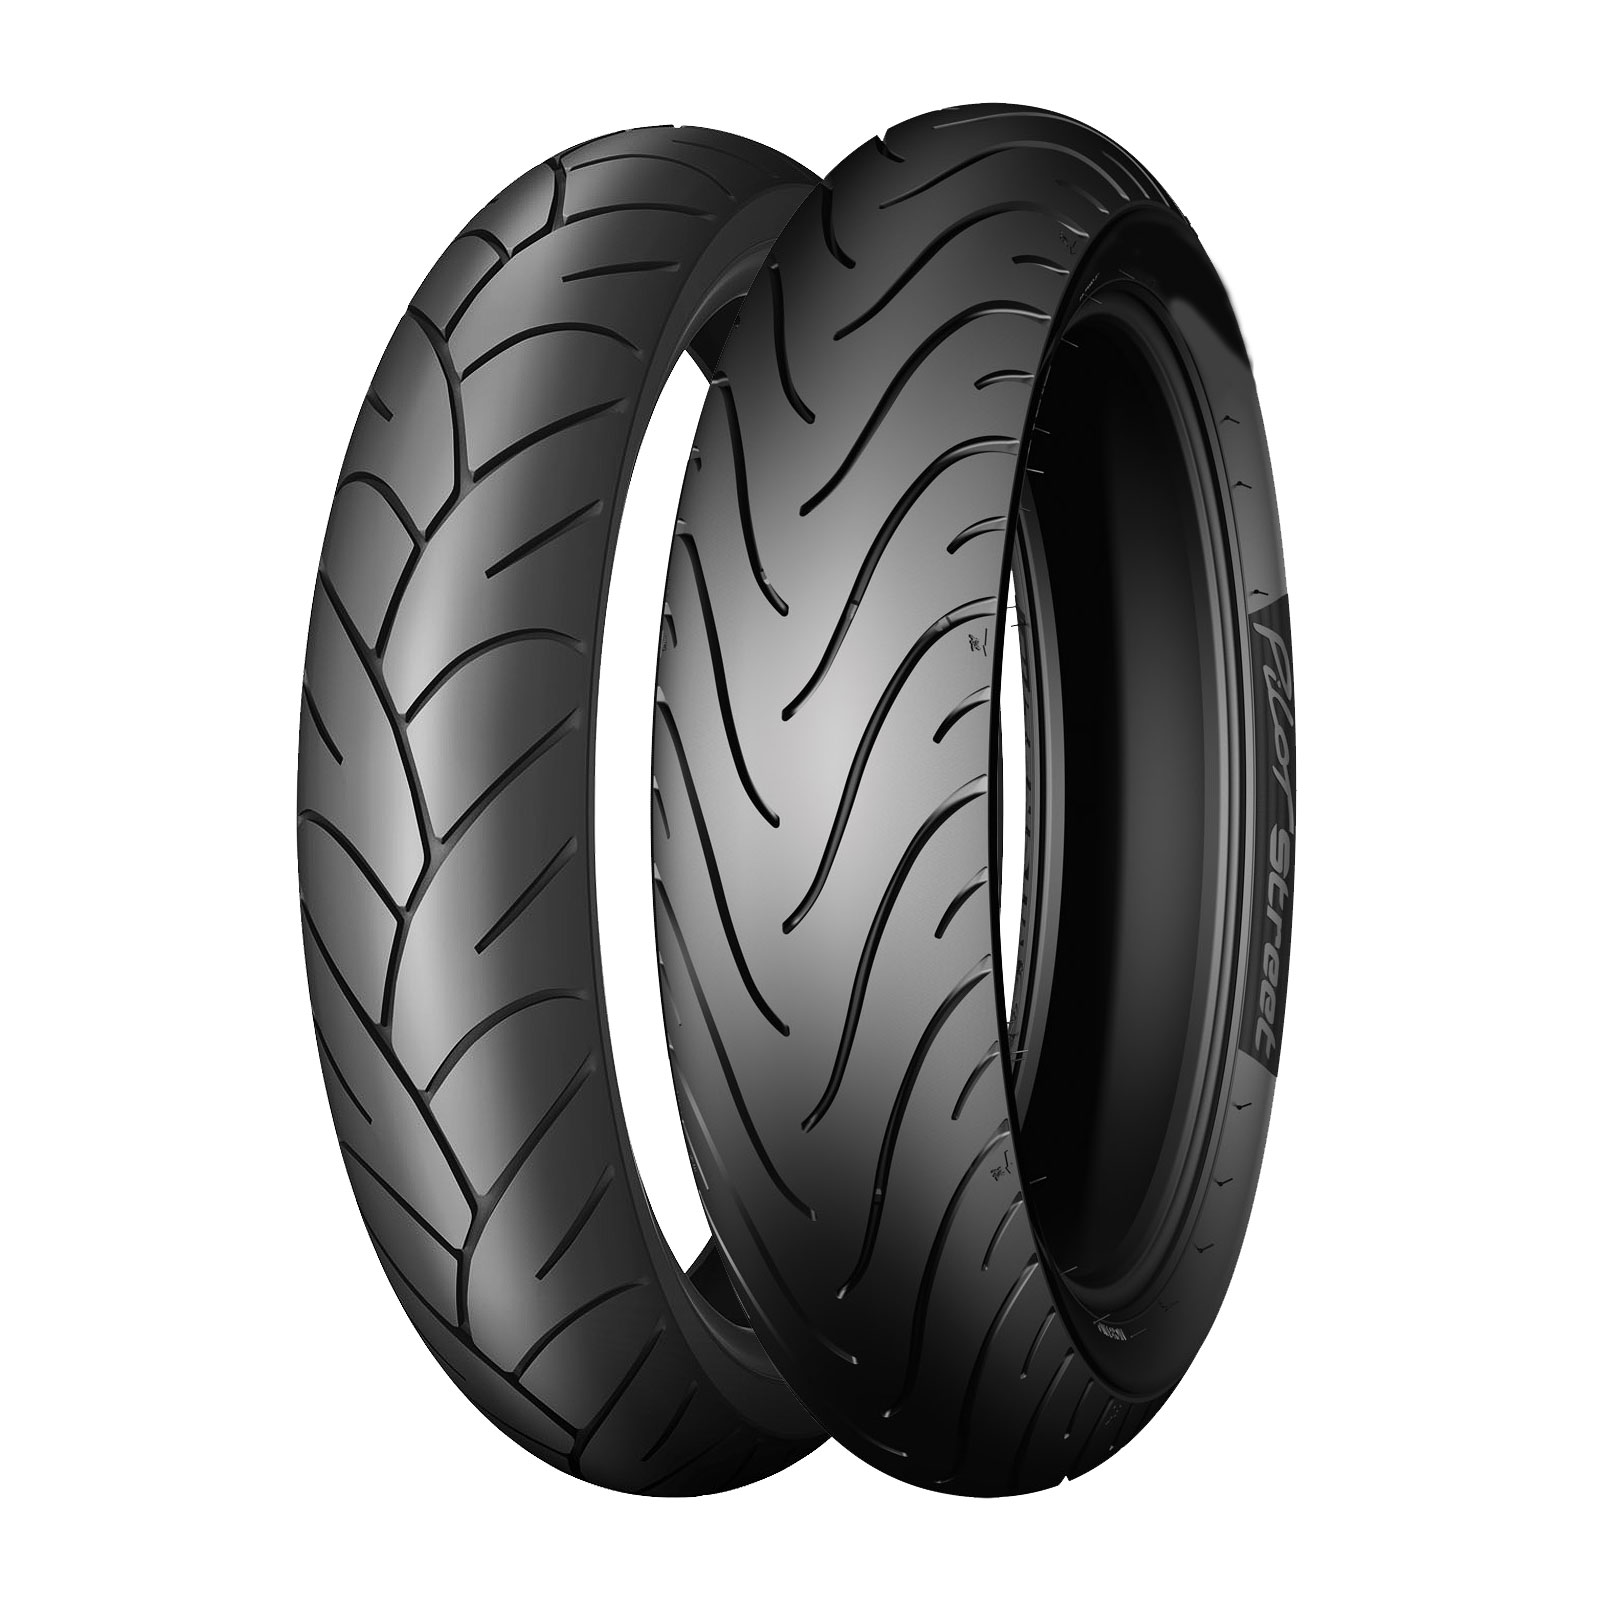 130/70-17 62S TL Michelin Pilot Street Rear Tyre | FREE UK DELIVERY |  Flexible Ways To Pay | M&P